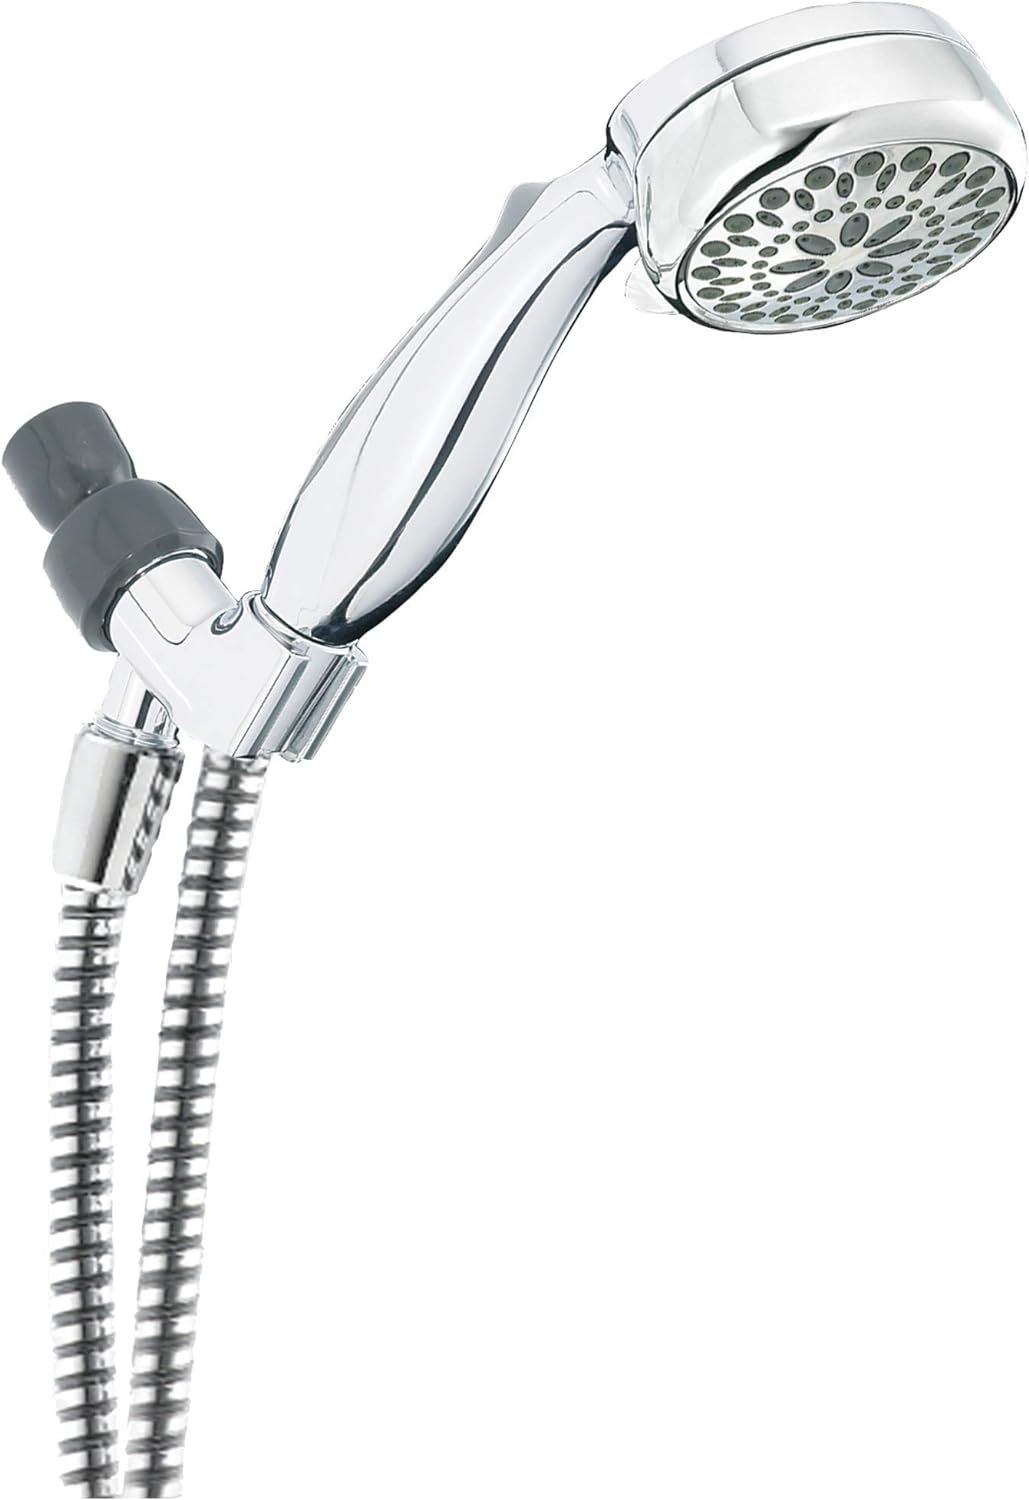 Delta Faucet 7-Spray Touch-Clean Hand Held Shower Head with Hose, Chrome, 75700